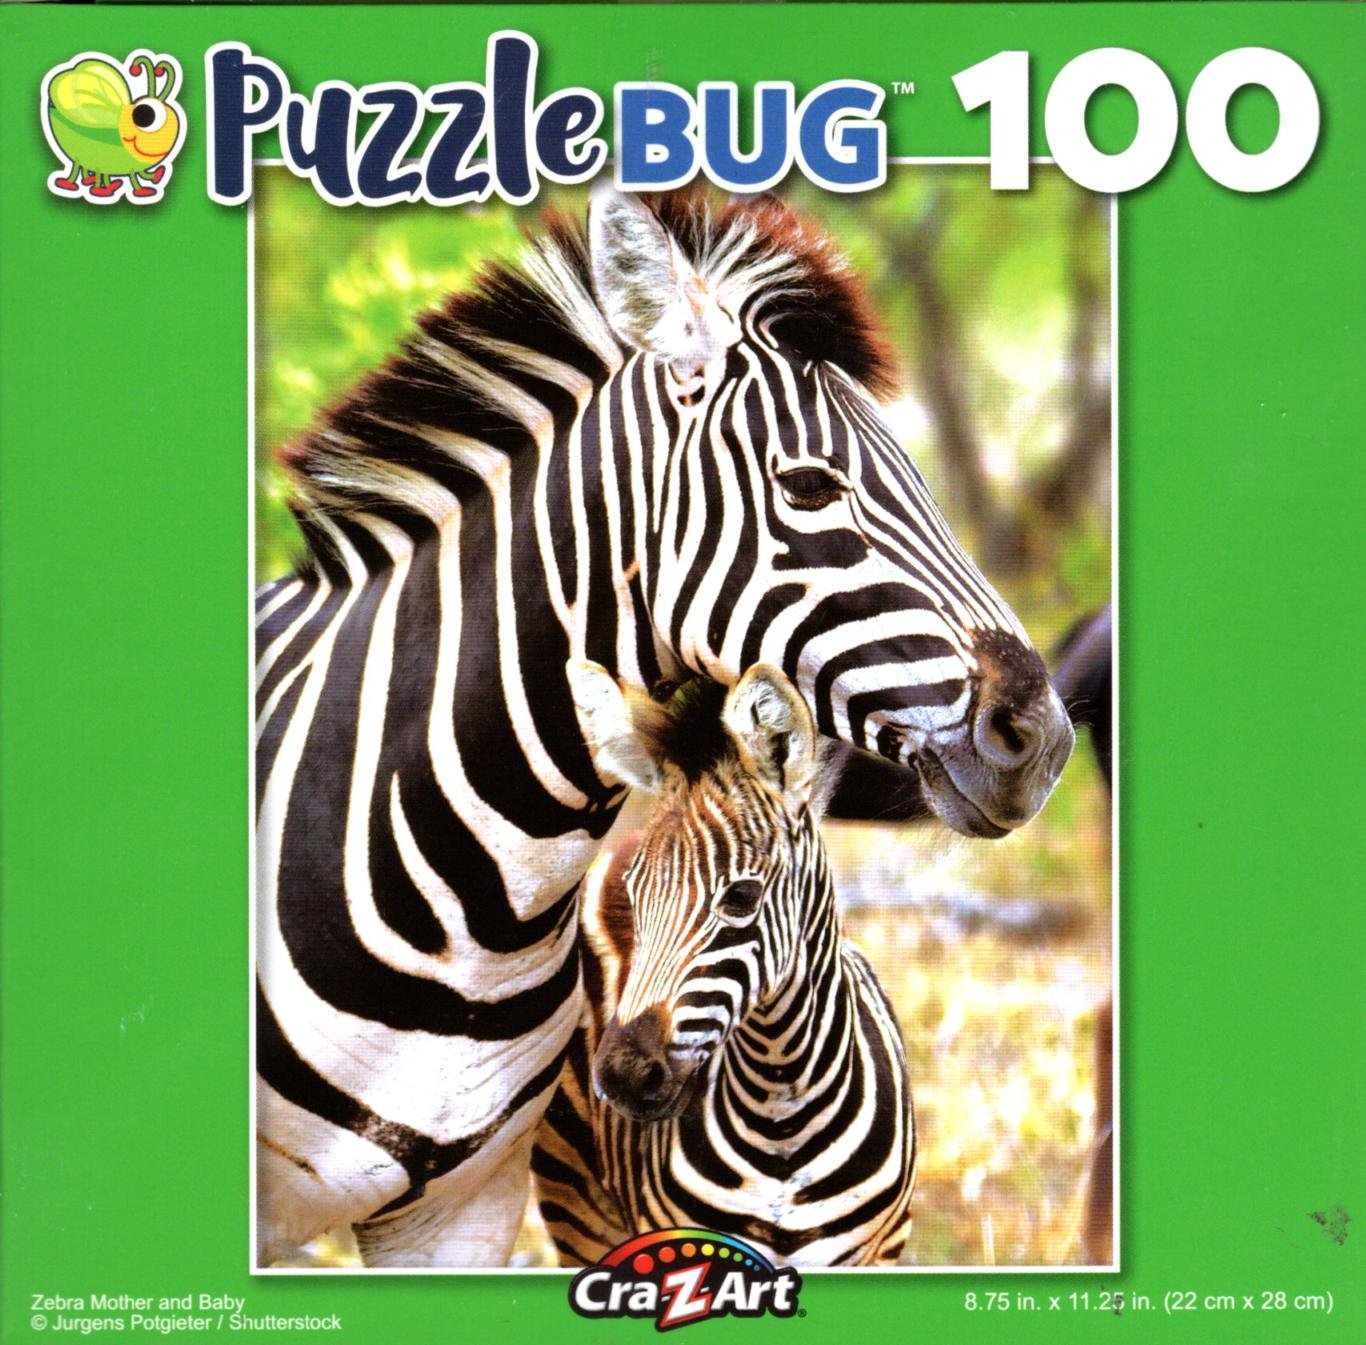 Zebra Mother and Baby - 100 Piece Jigsaw Puzzle